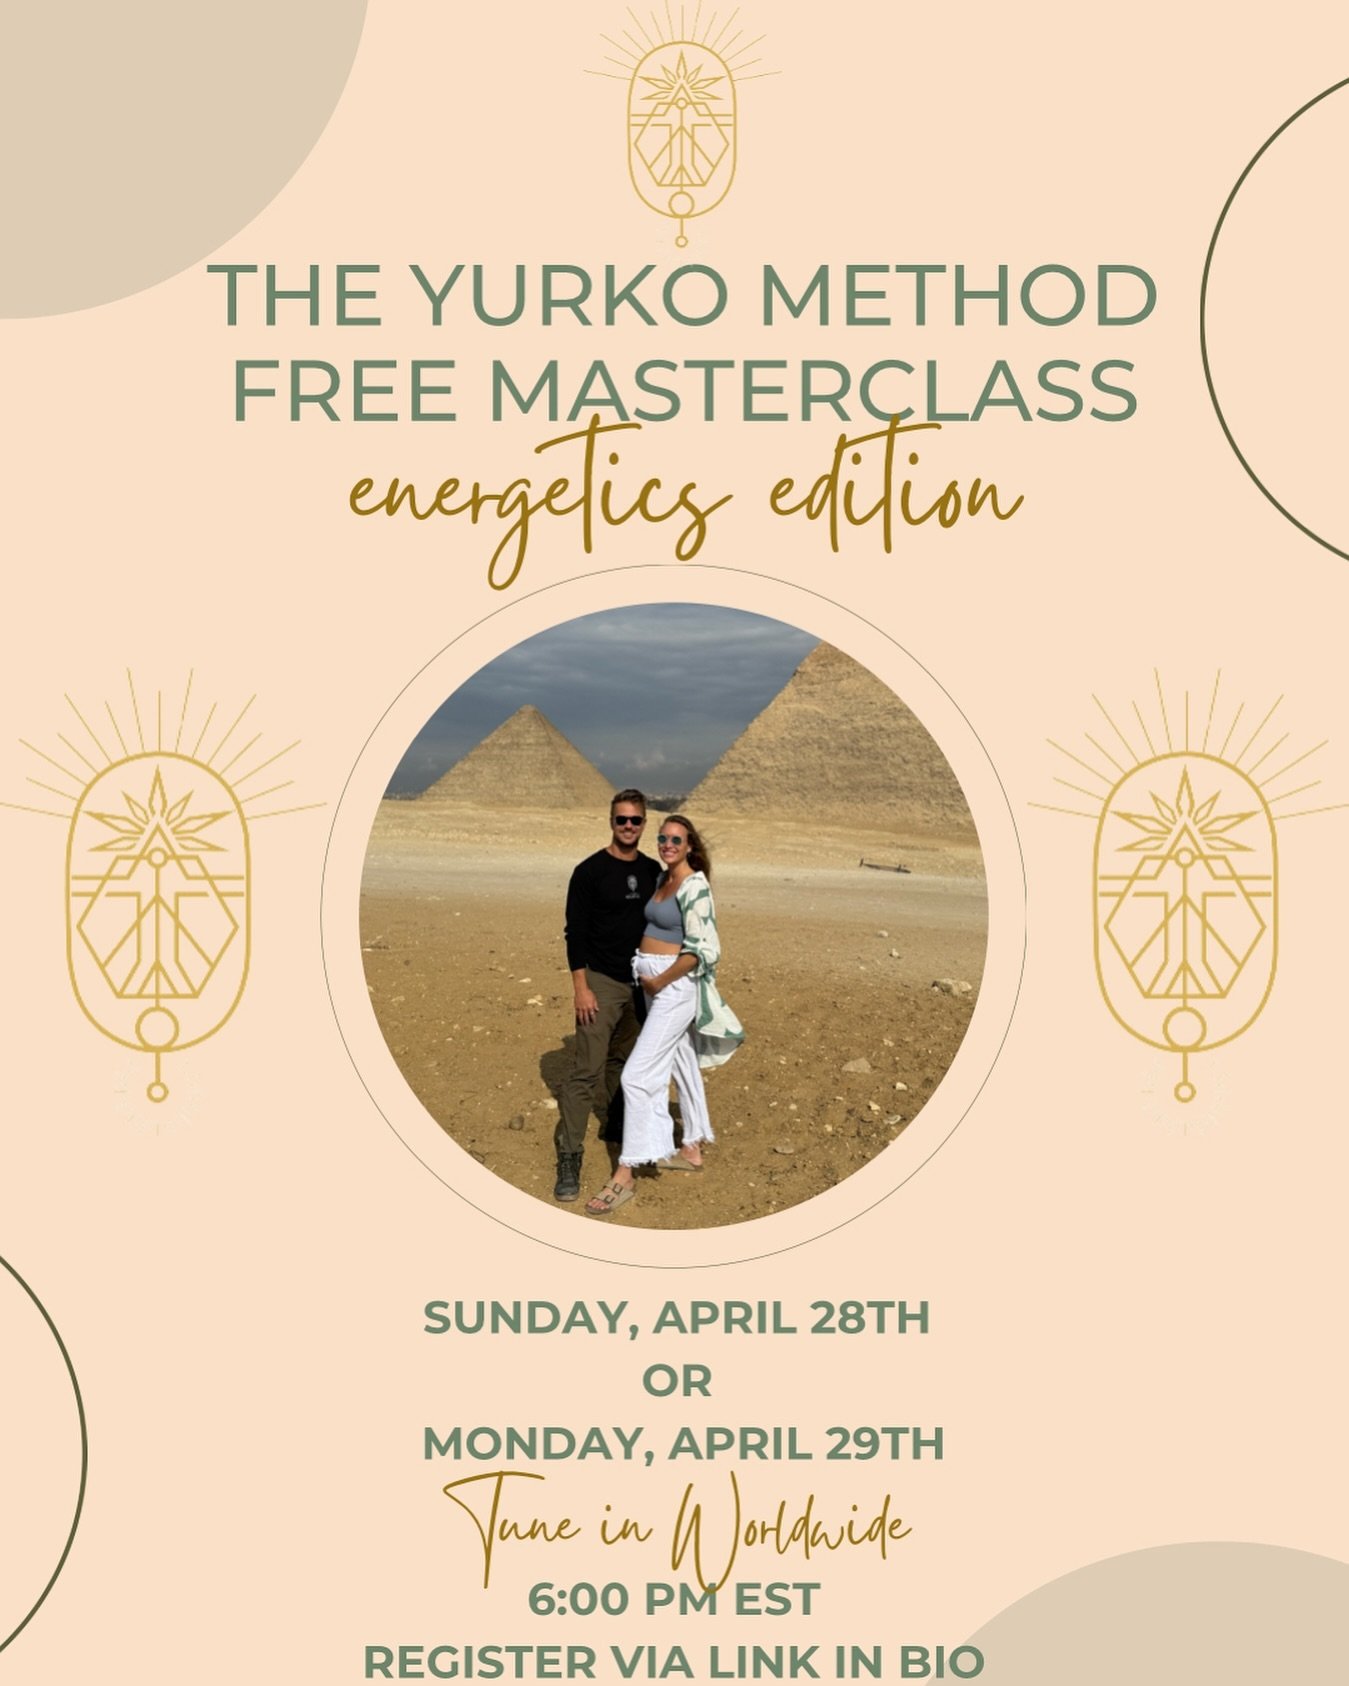 Join us for a deep dive into the foundations of energetics and life force within the body. Gain tools and knowledge for releasing stagnations to optimize your LIFE!⚡️

FREE!
Sunday, April 29th OR Monday, April 30th 
6:00 PM EST 
Tune in Worldwide 🌎?